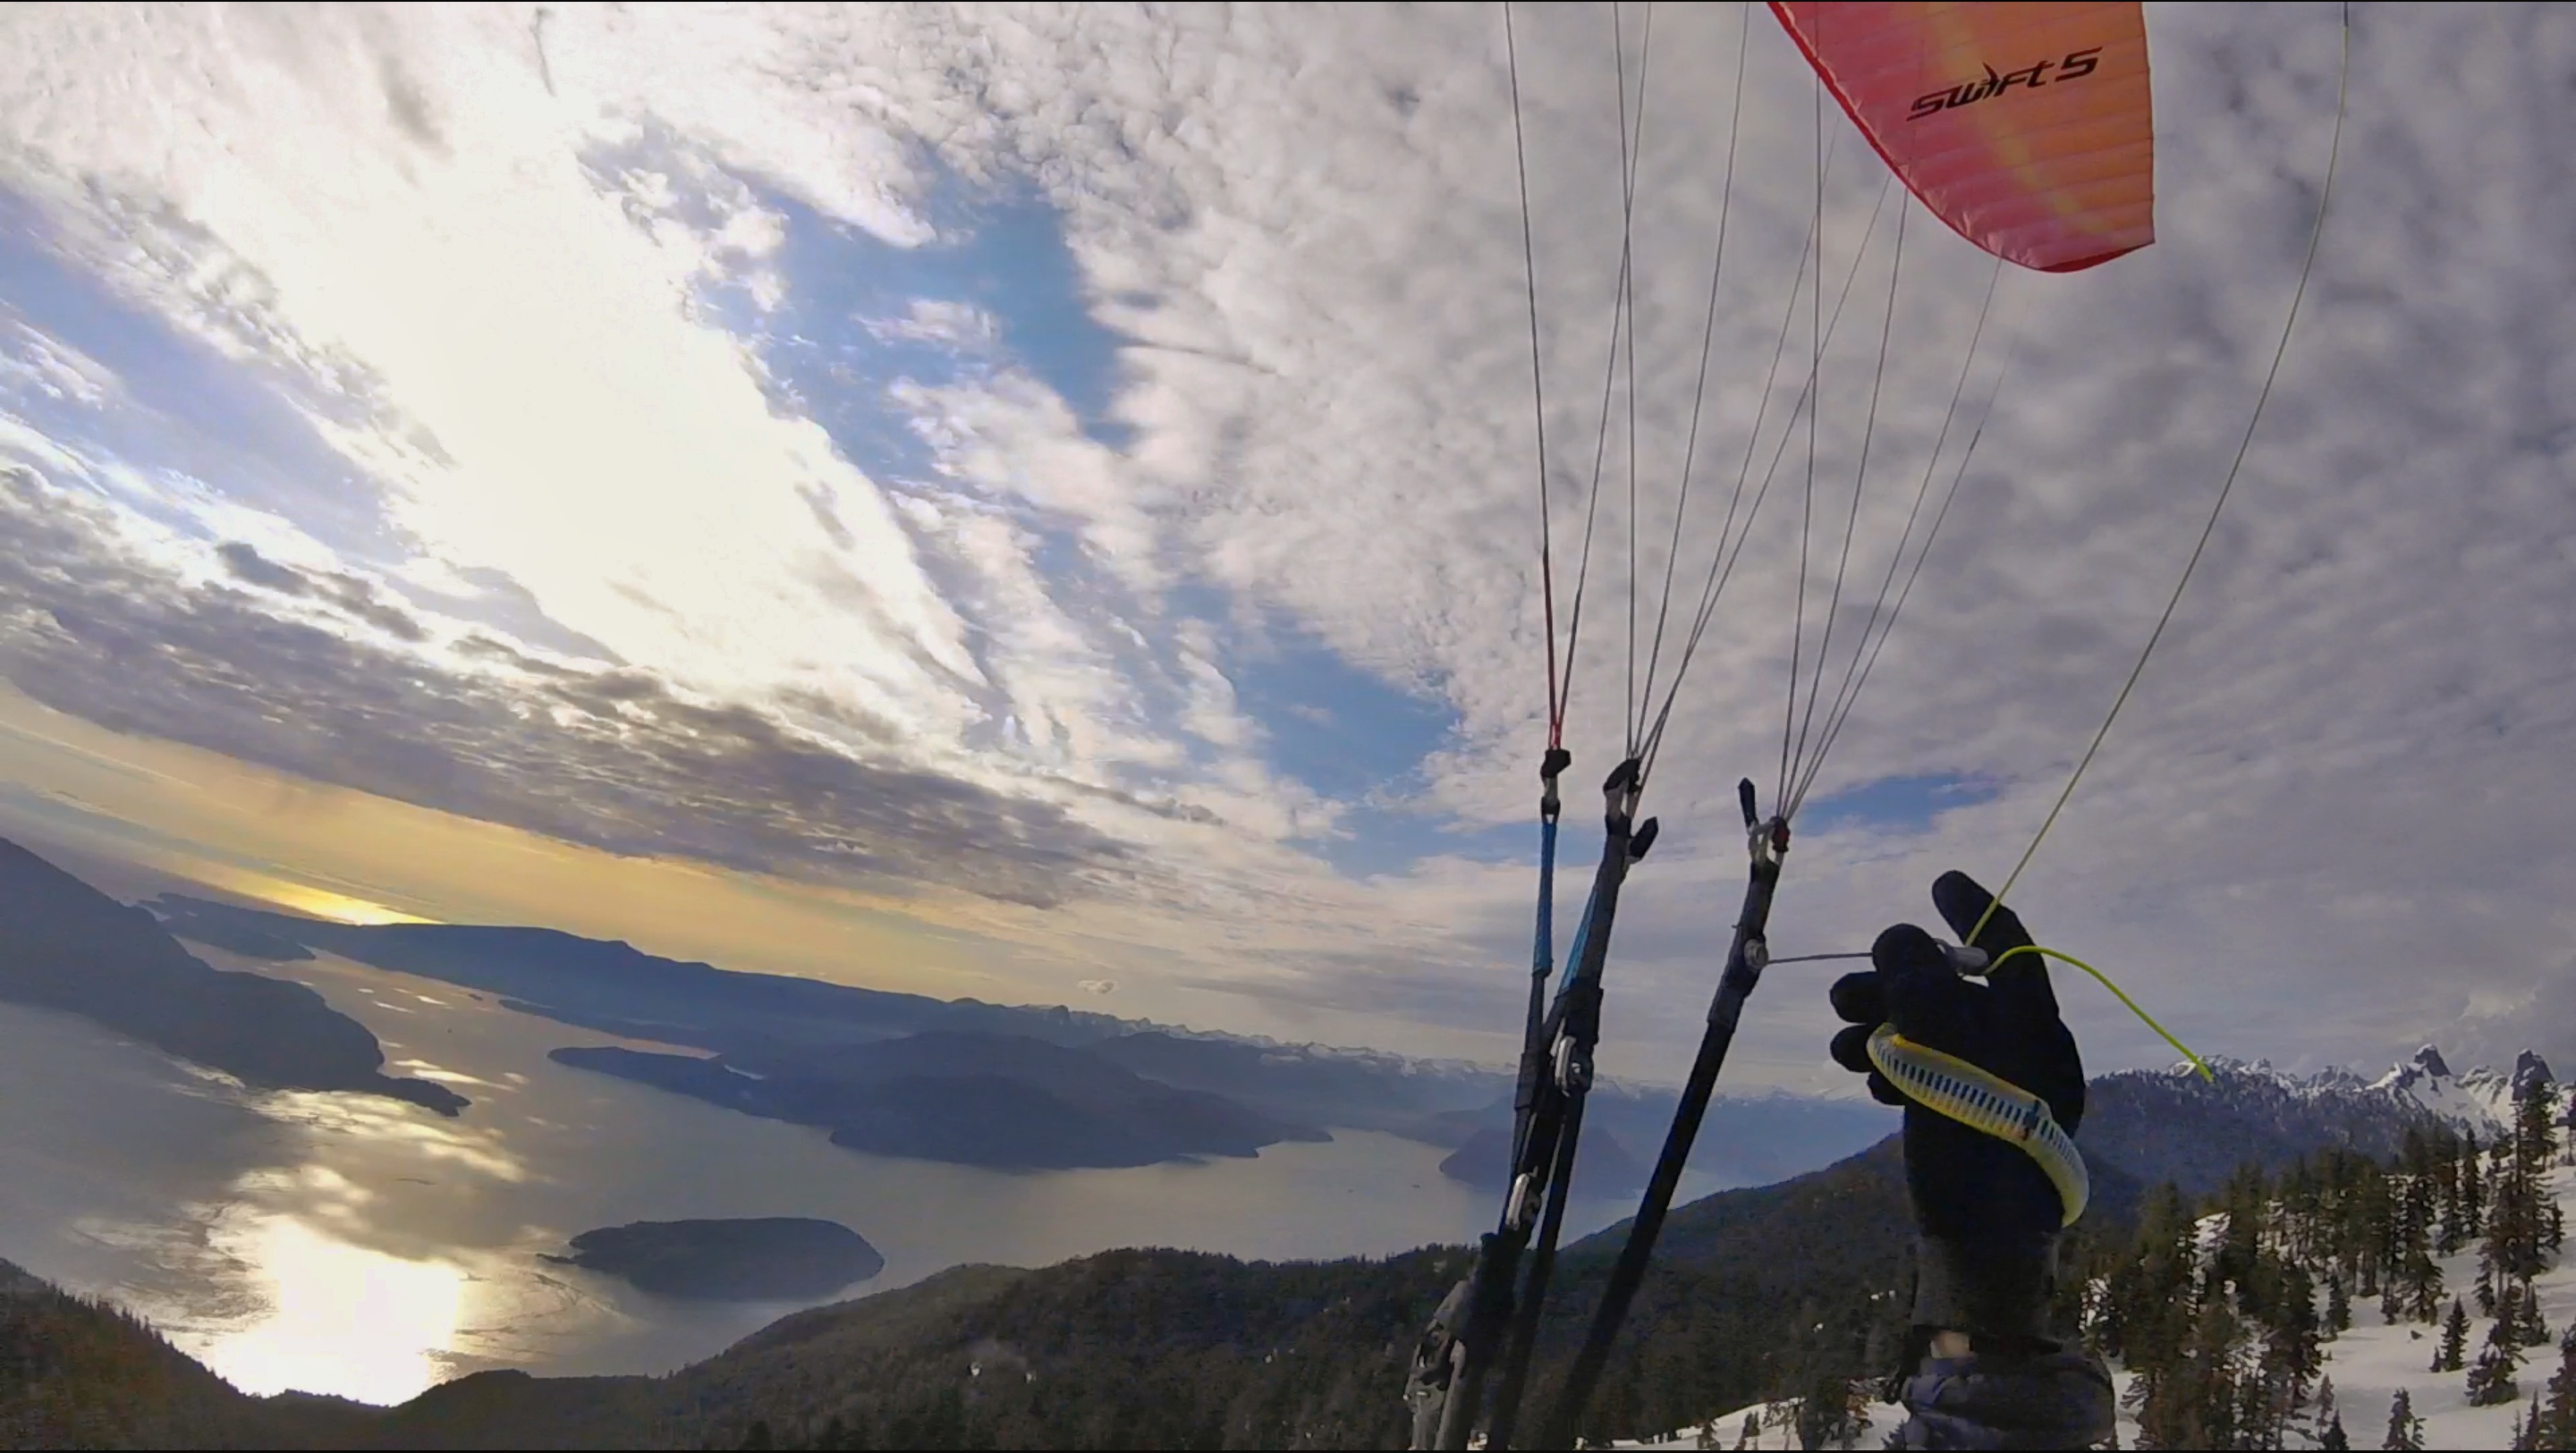 Paragliding over Mt. Strachan, Vancouver